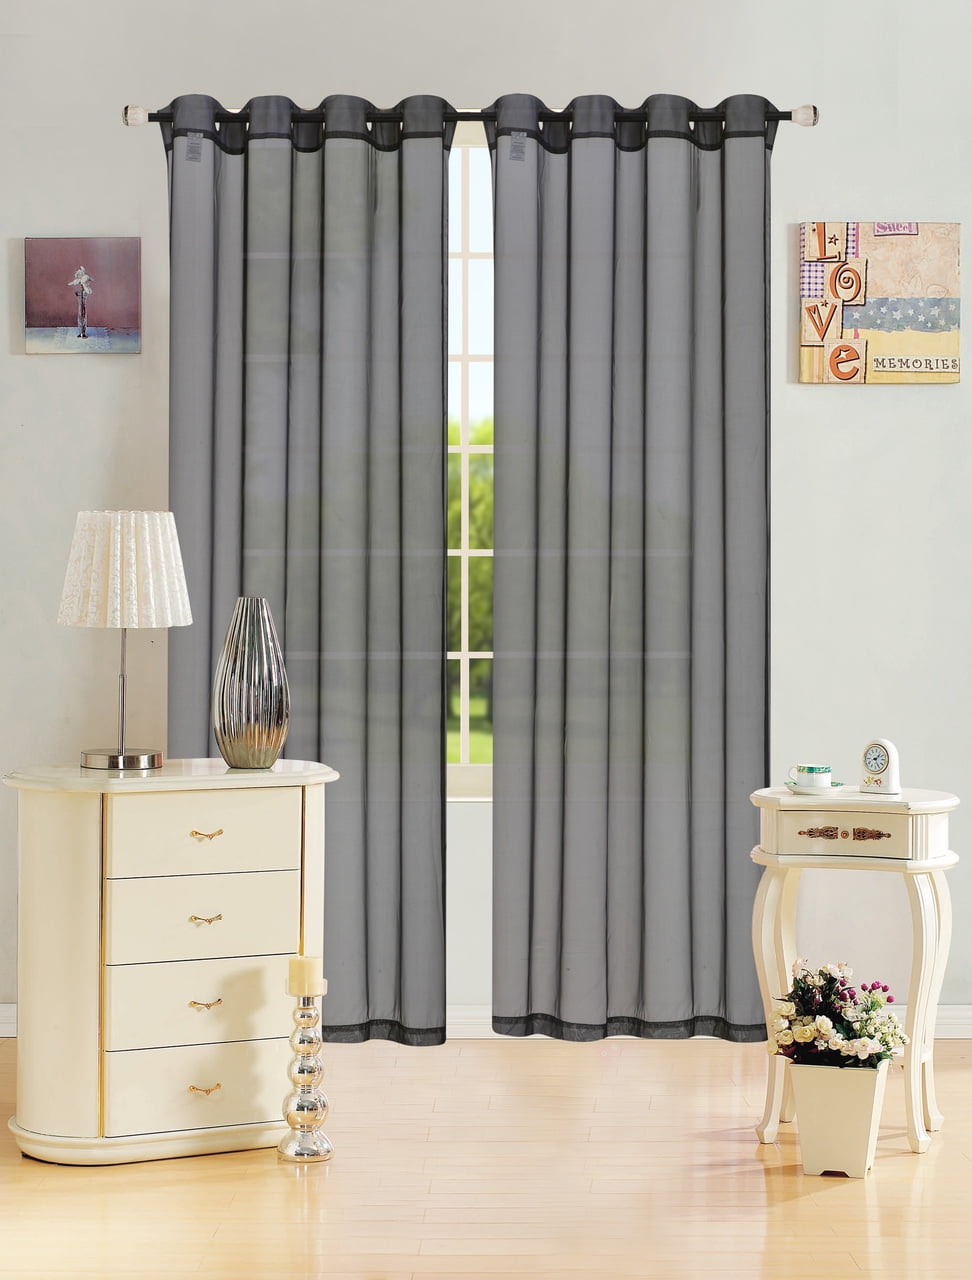 Lisa Sheer Voile Window Curtains Panel Home Bedroom Living room 55" x 84" 1 Pc 